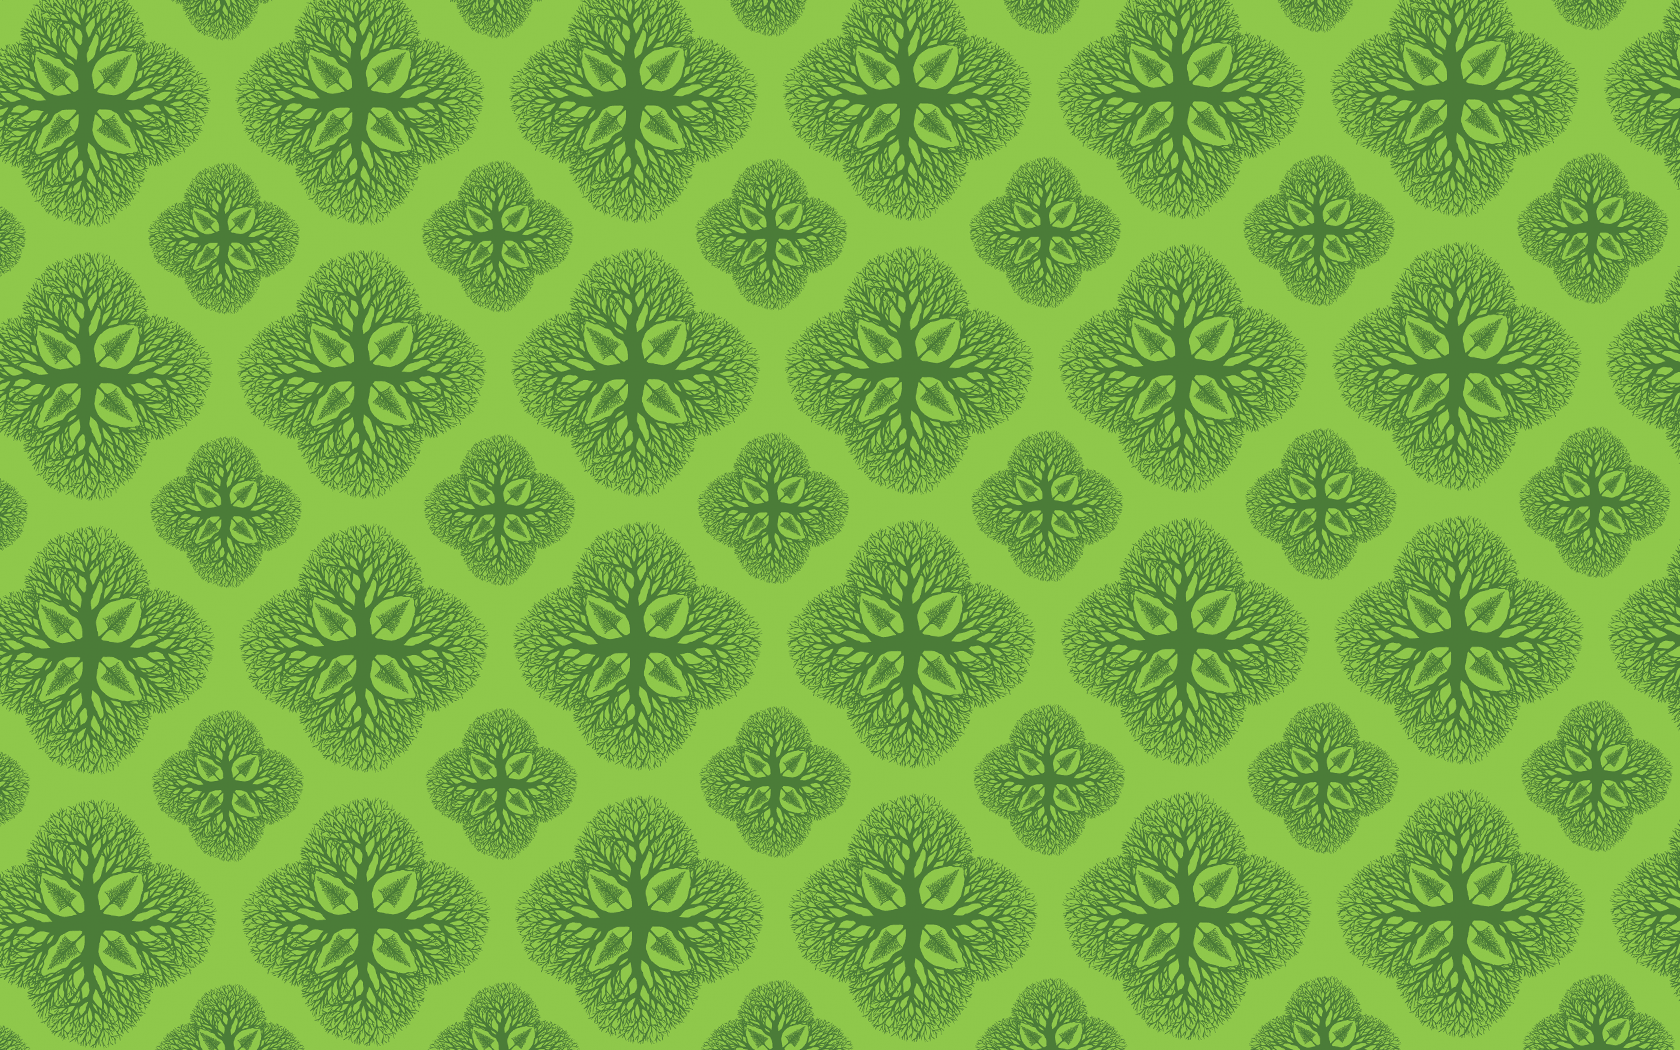 60 Green Backgrounds - World of Printables